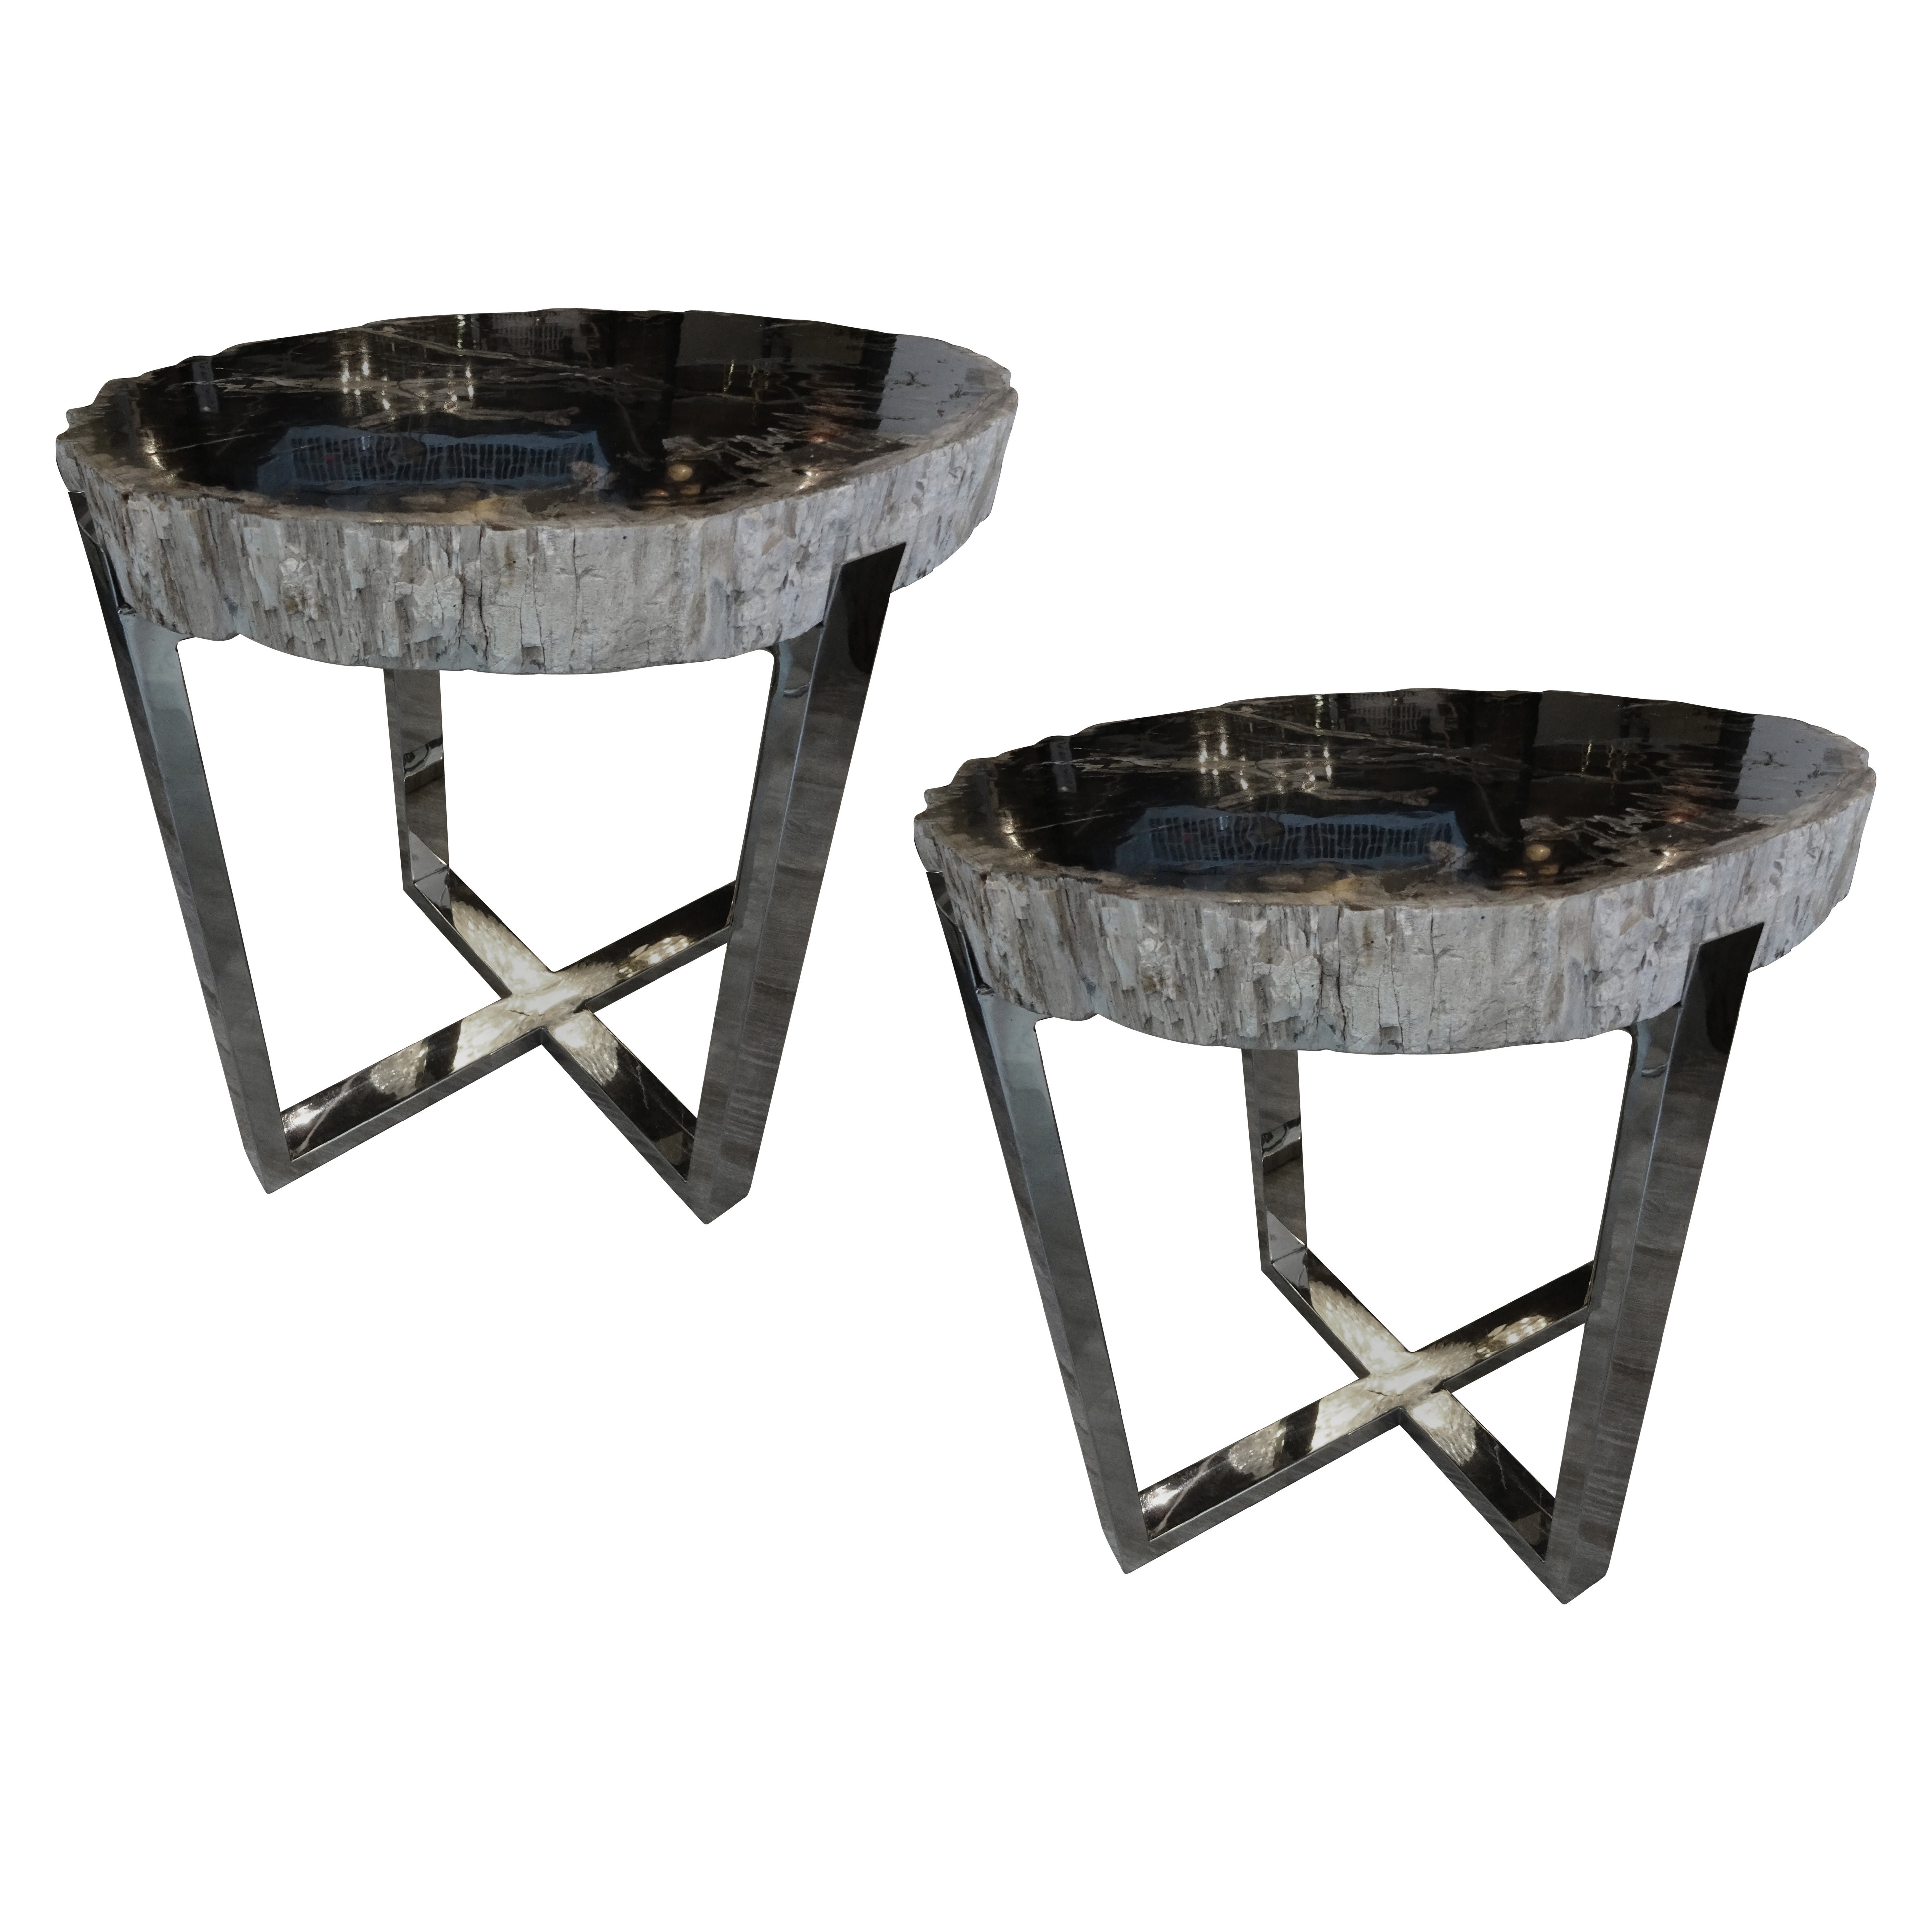 Petrified Wood Tables with Steel "X" Base